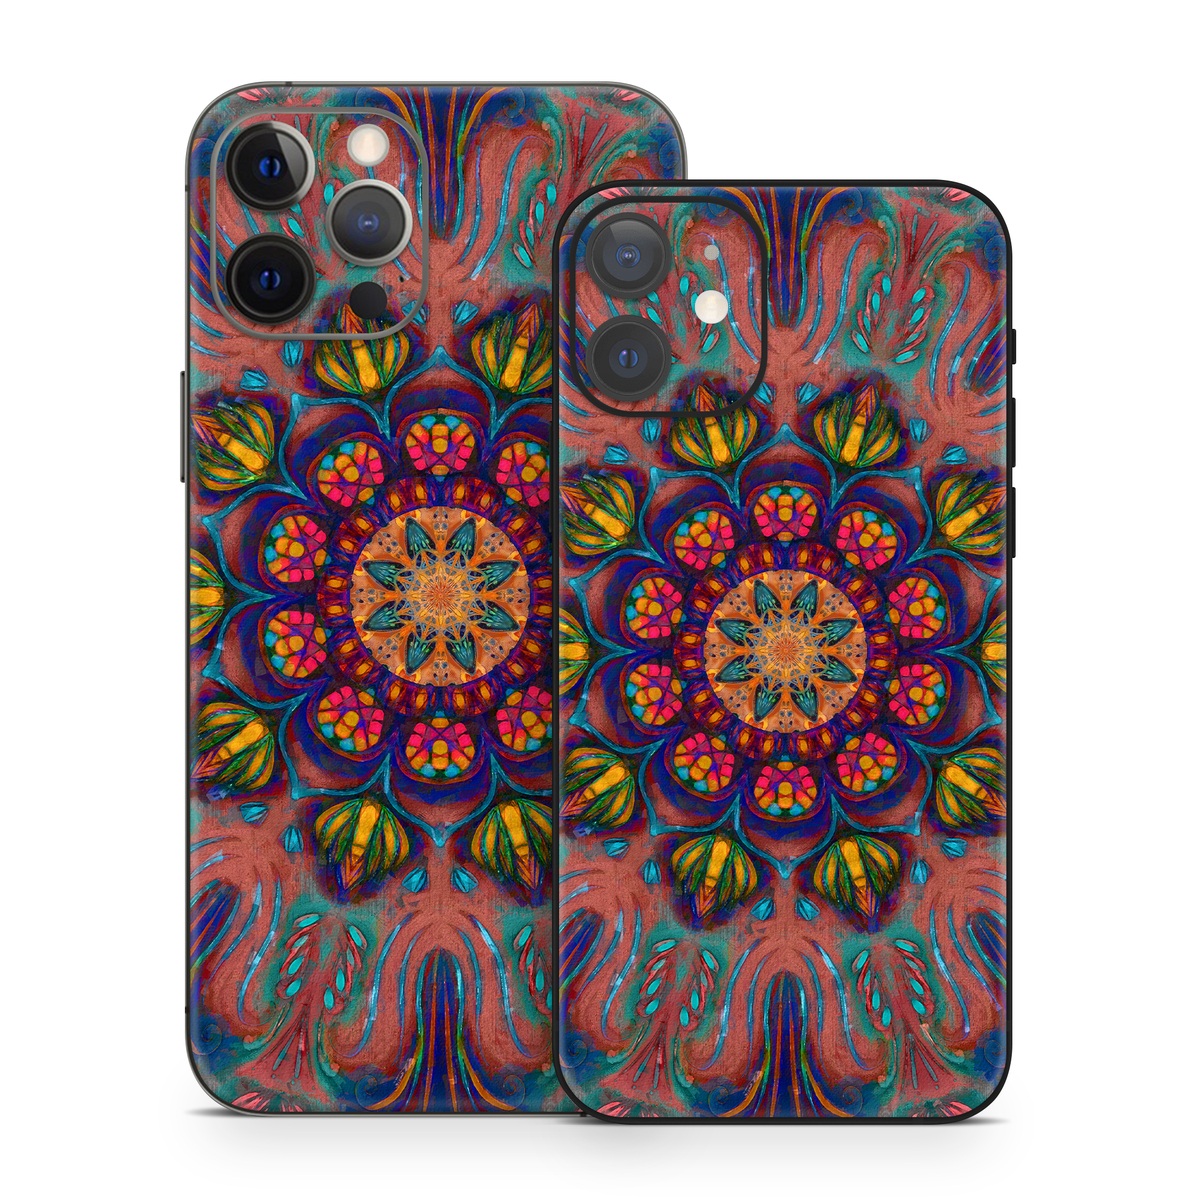 iPhone 12 Series Skin design of Psychedelic art, Pattern, Art, Textile, Symmetry, Visual arts, Design, Fractal art, Kaleidoscope, Tapestry, with blue, yellow, red, green, pink, green colors